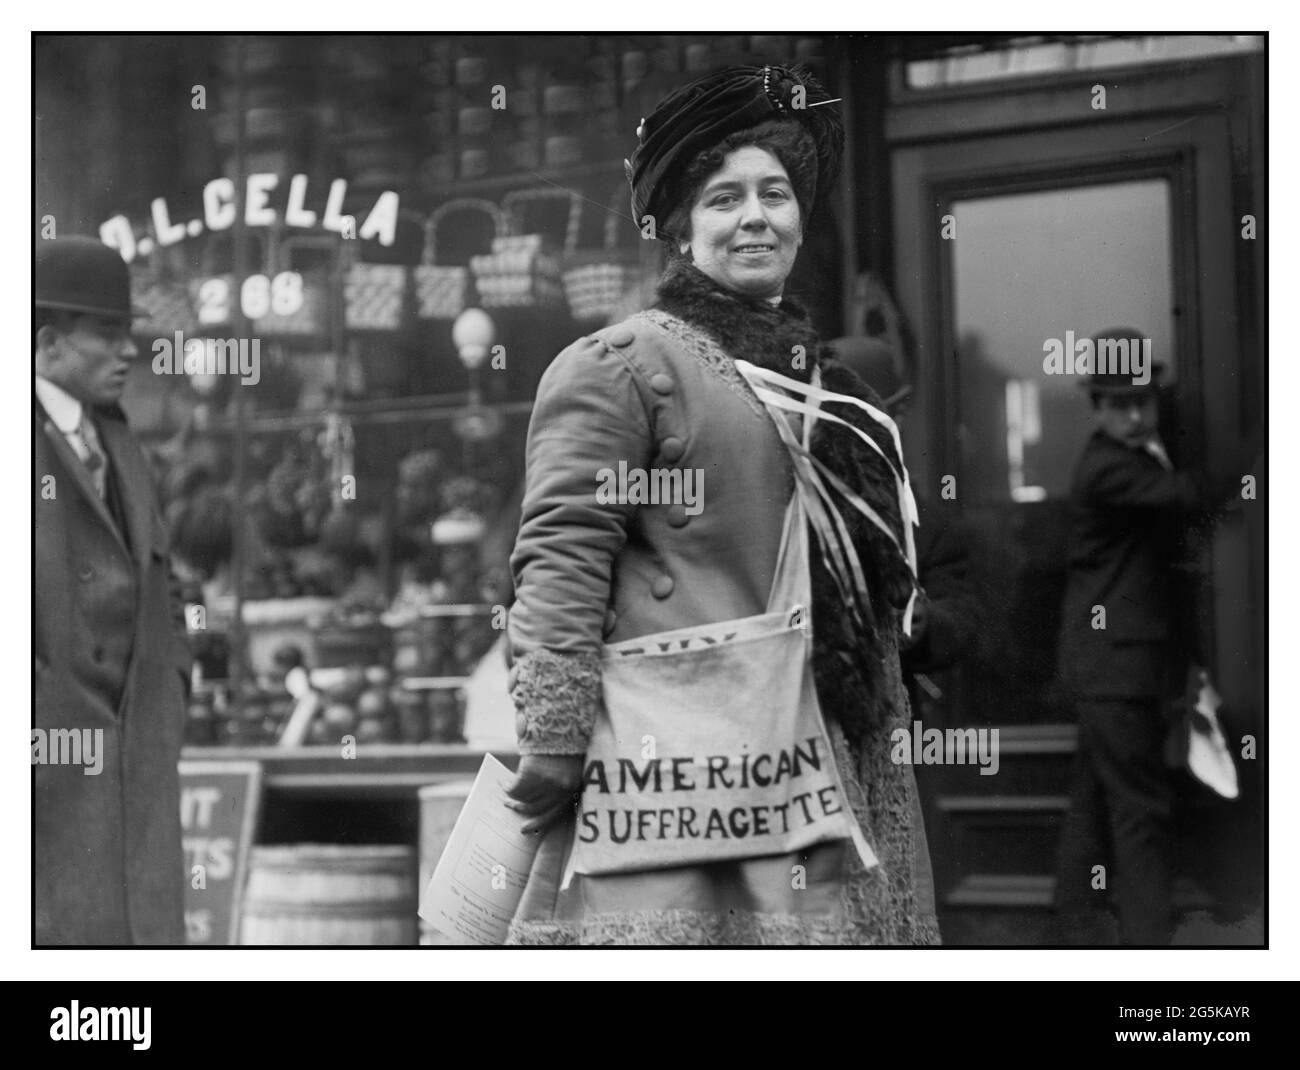 SUFFRAGE 1900’s Mrs. H. Riordan, suffragette selling political suffrage leaflet news to promote Nineteenth Amendment to the United States Constitution Bain News Service, publisher New York USA 1/27/10 Stock Photo